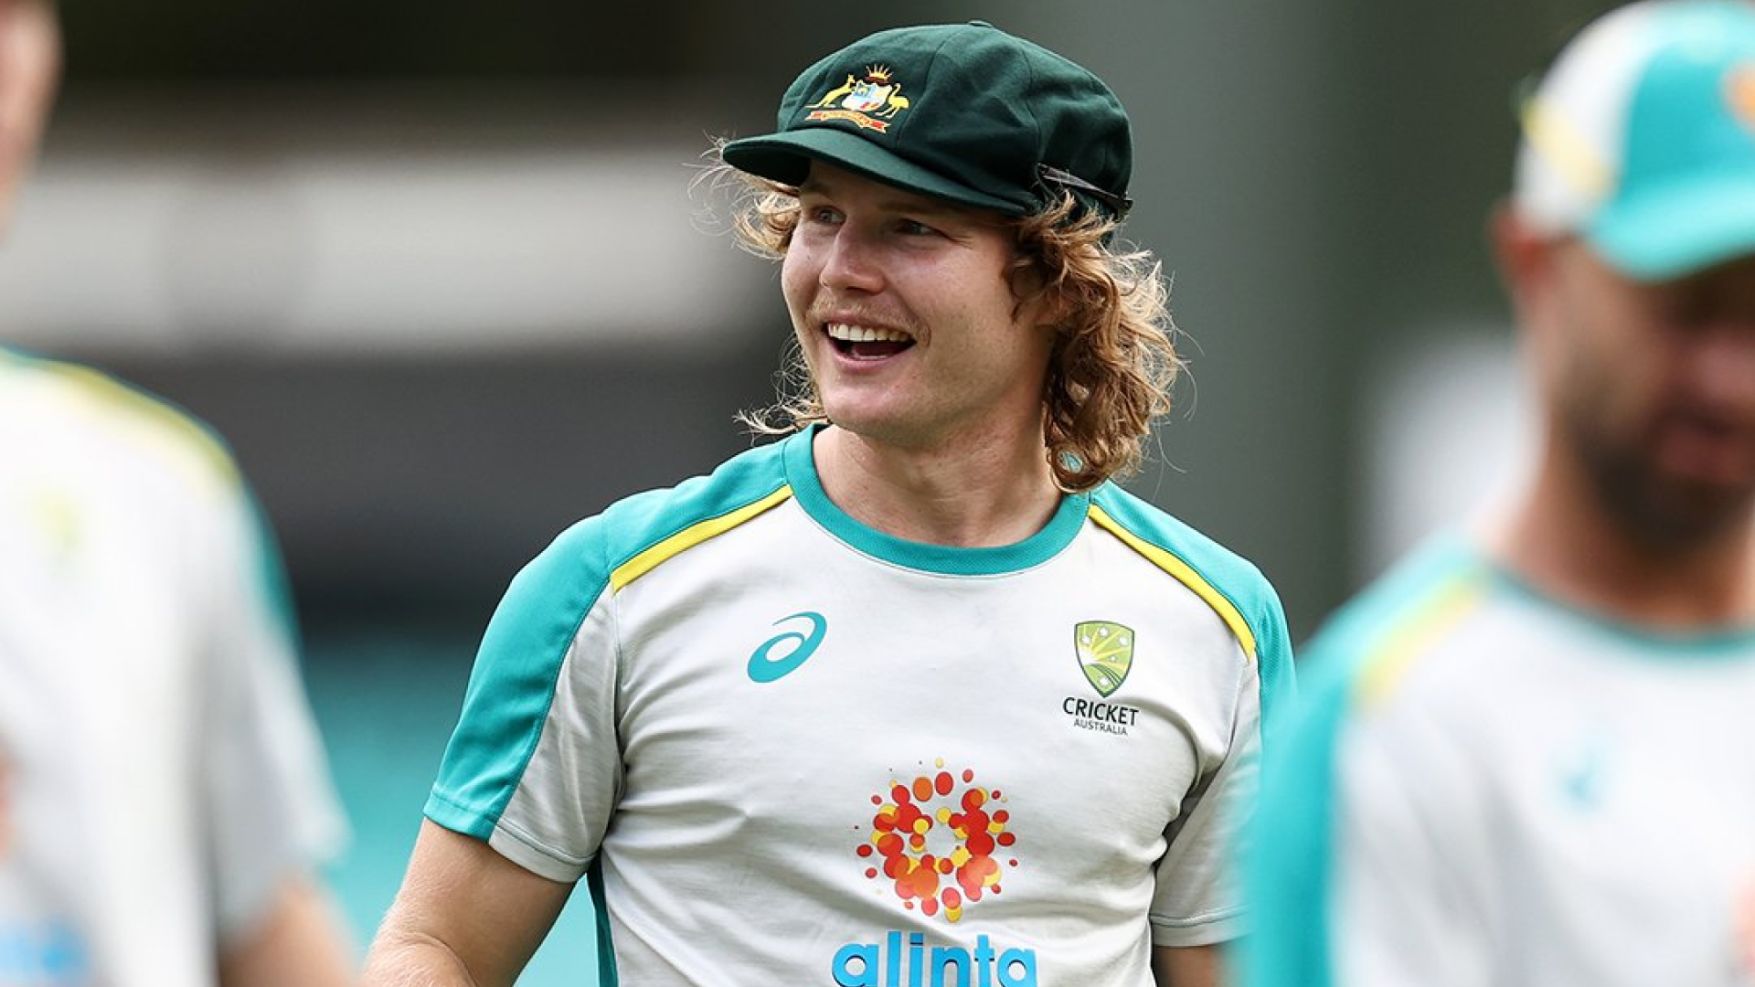 Will Pucovski won’t play any part in Test cricket this summer, says Victoria coach Chris Rogers